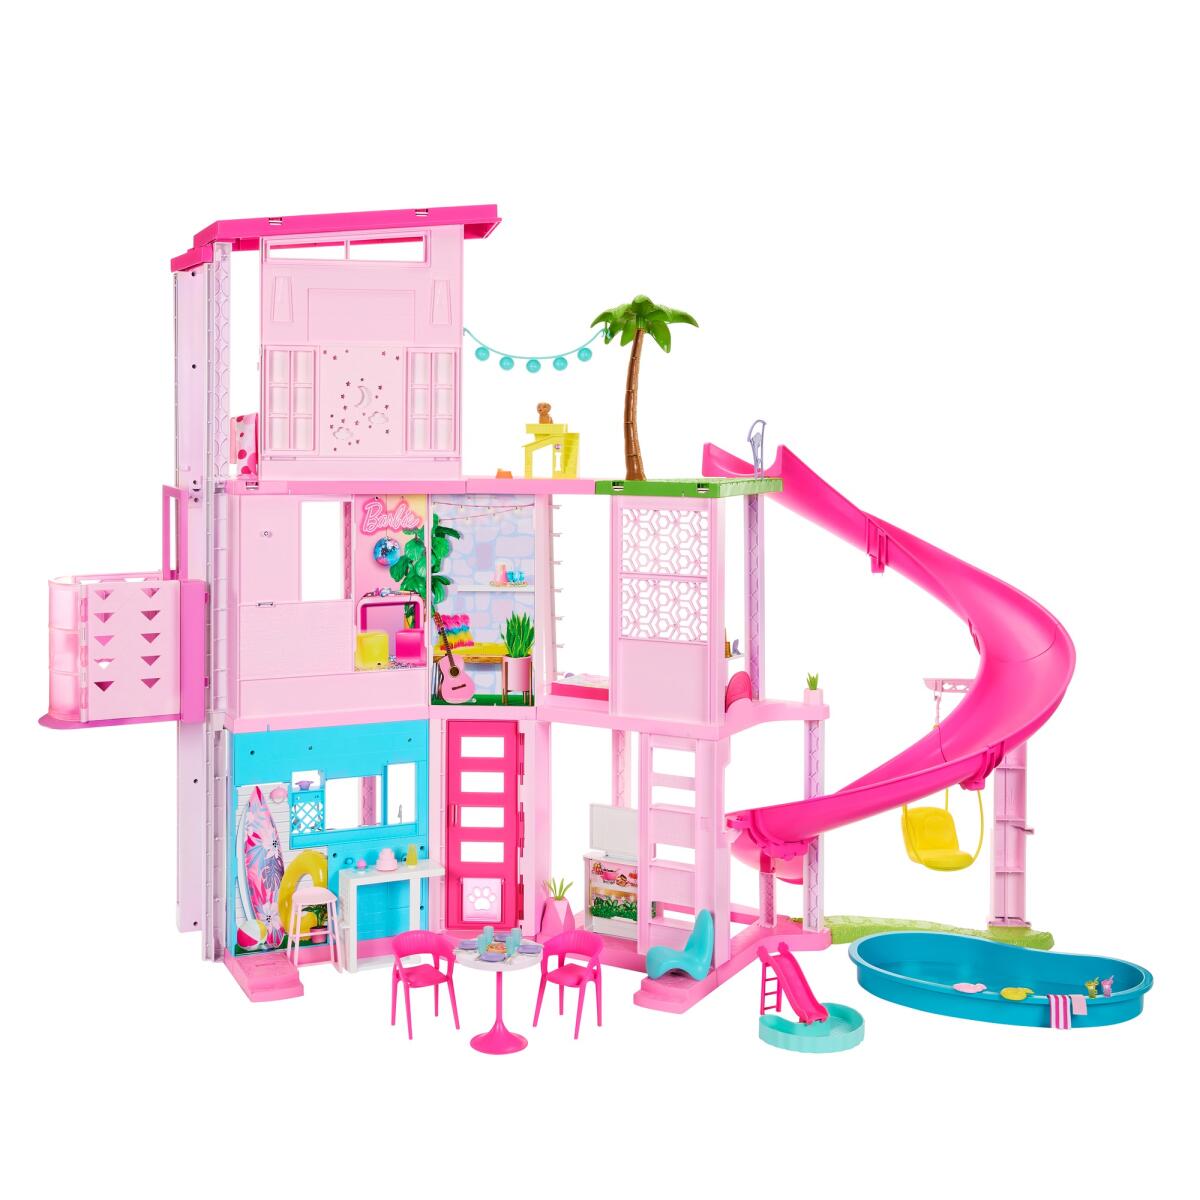 A three-story contemporary-style dollhouse is rendered in pink with a bright slide, a palm tree and swimming pool